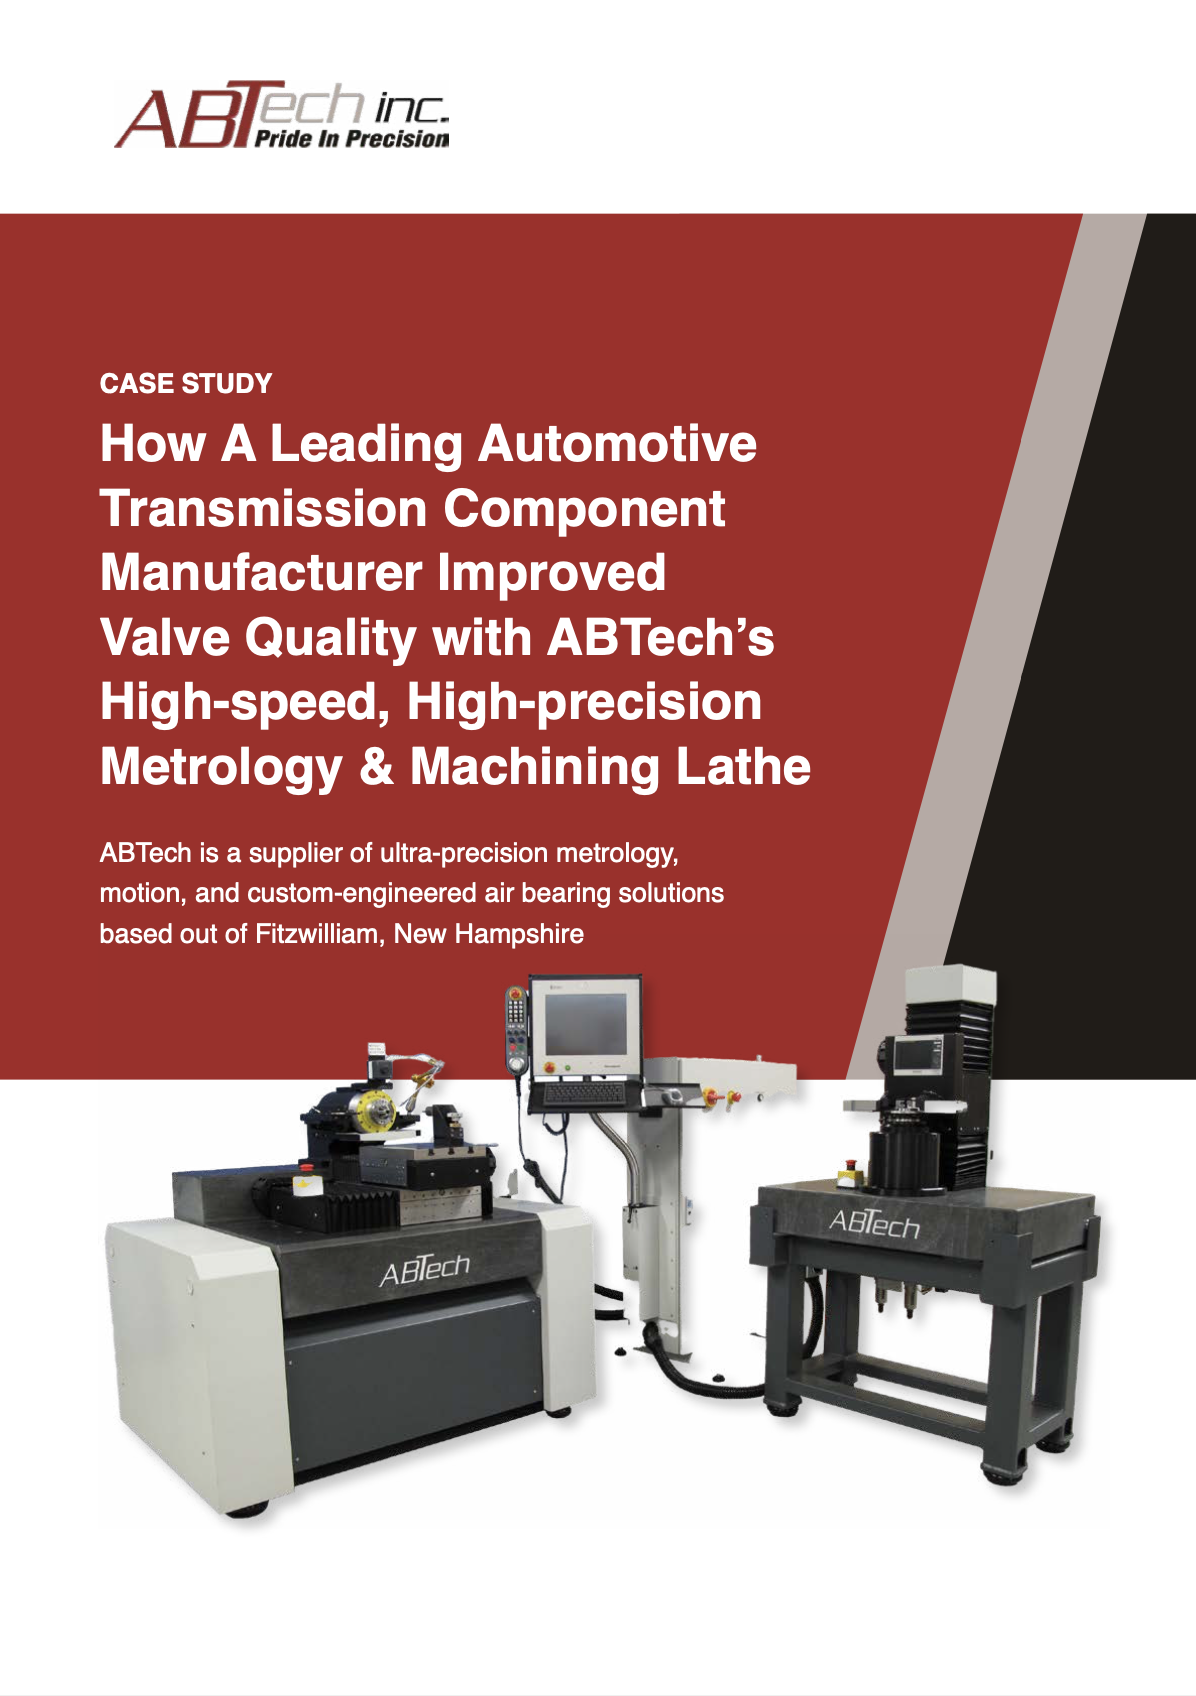 Case Study Cover Image with a high precision metrology & machining lathe